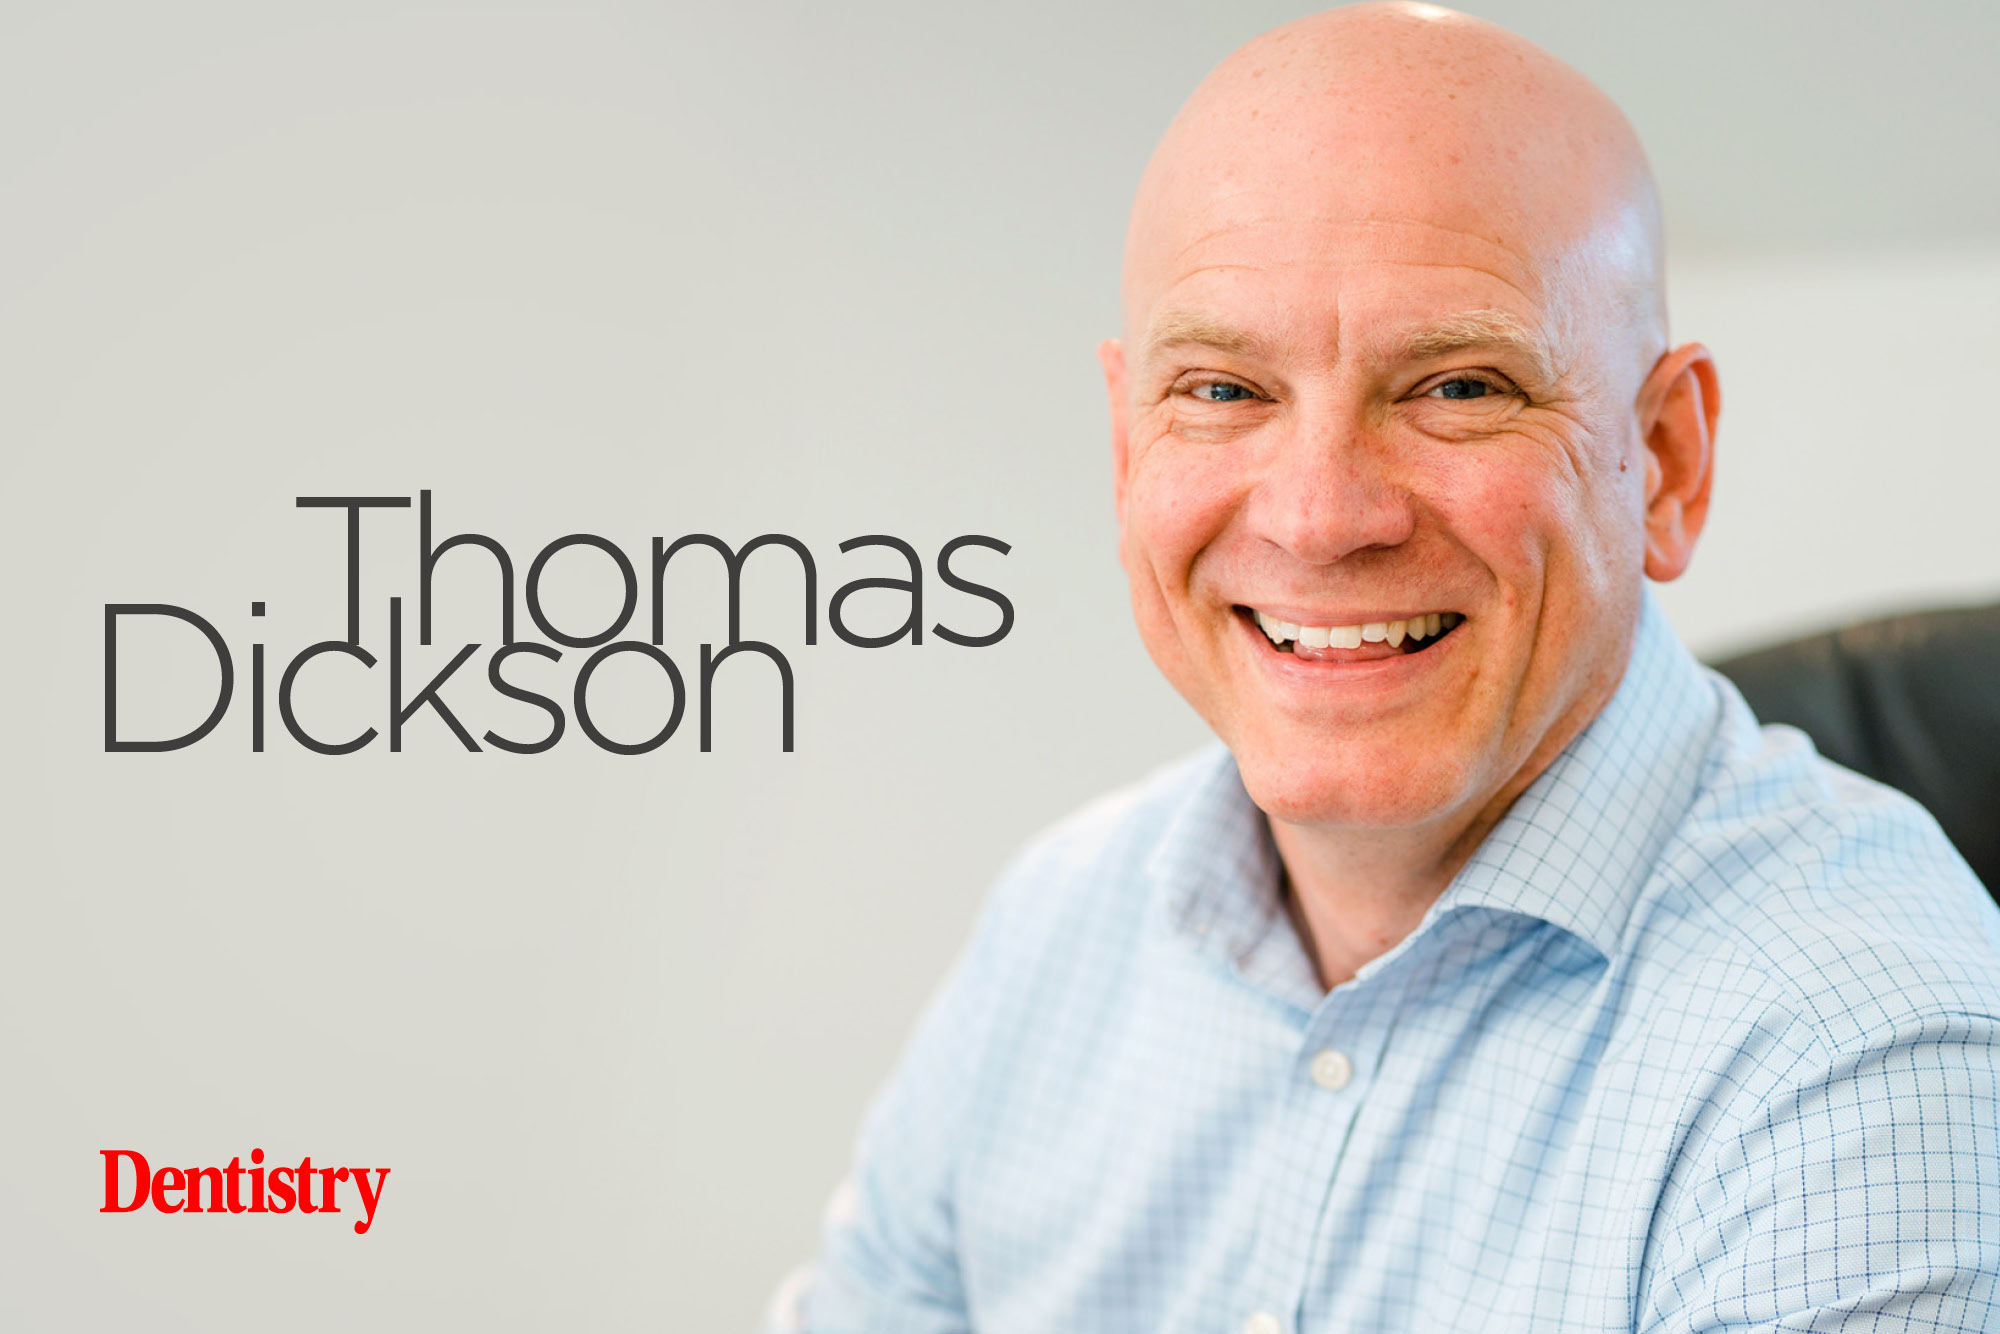 Dentistry podcast – Thomas Dickson on ethical investing